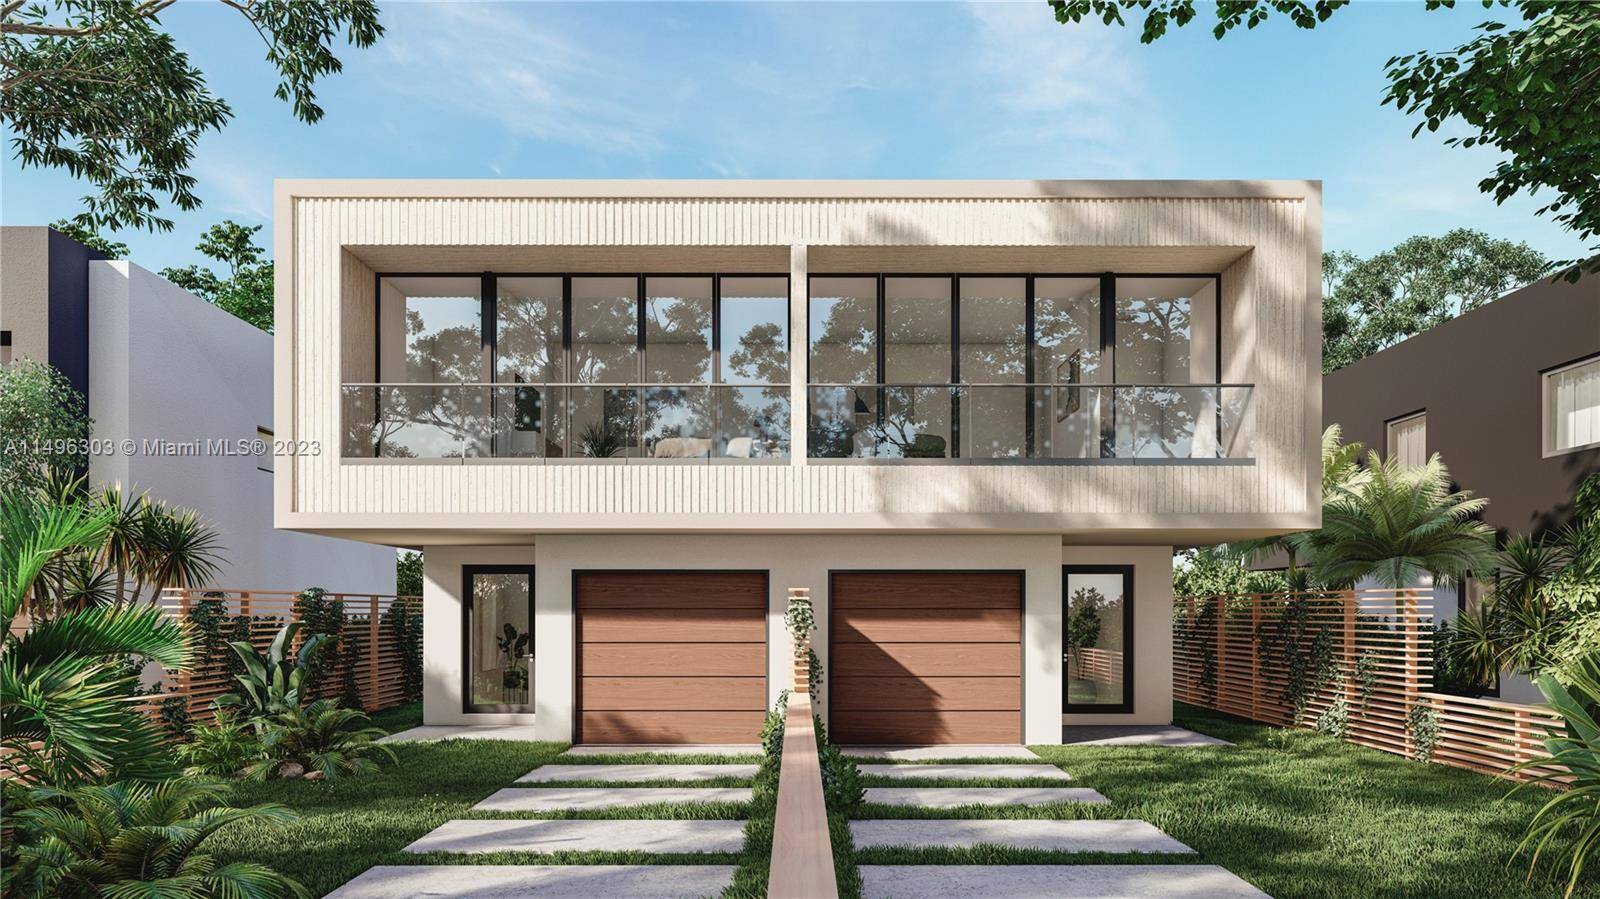 Custom new construction two story townhomes in the heart of Coconut Grove, with a total area of 3, 066 SF and a sizable 4 BD, 3.